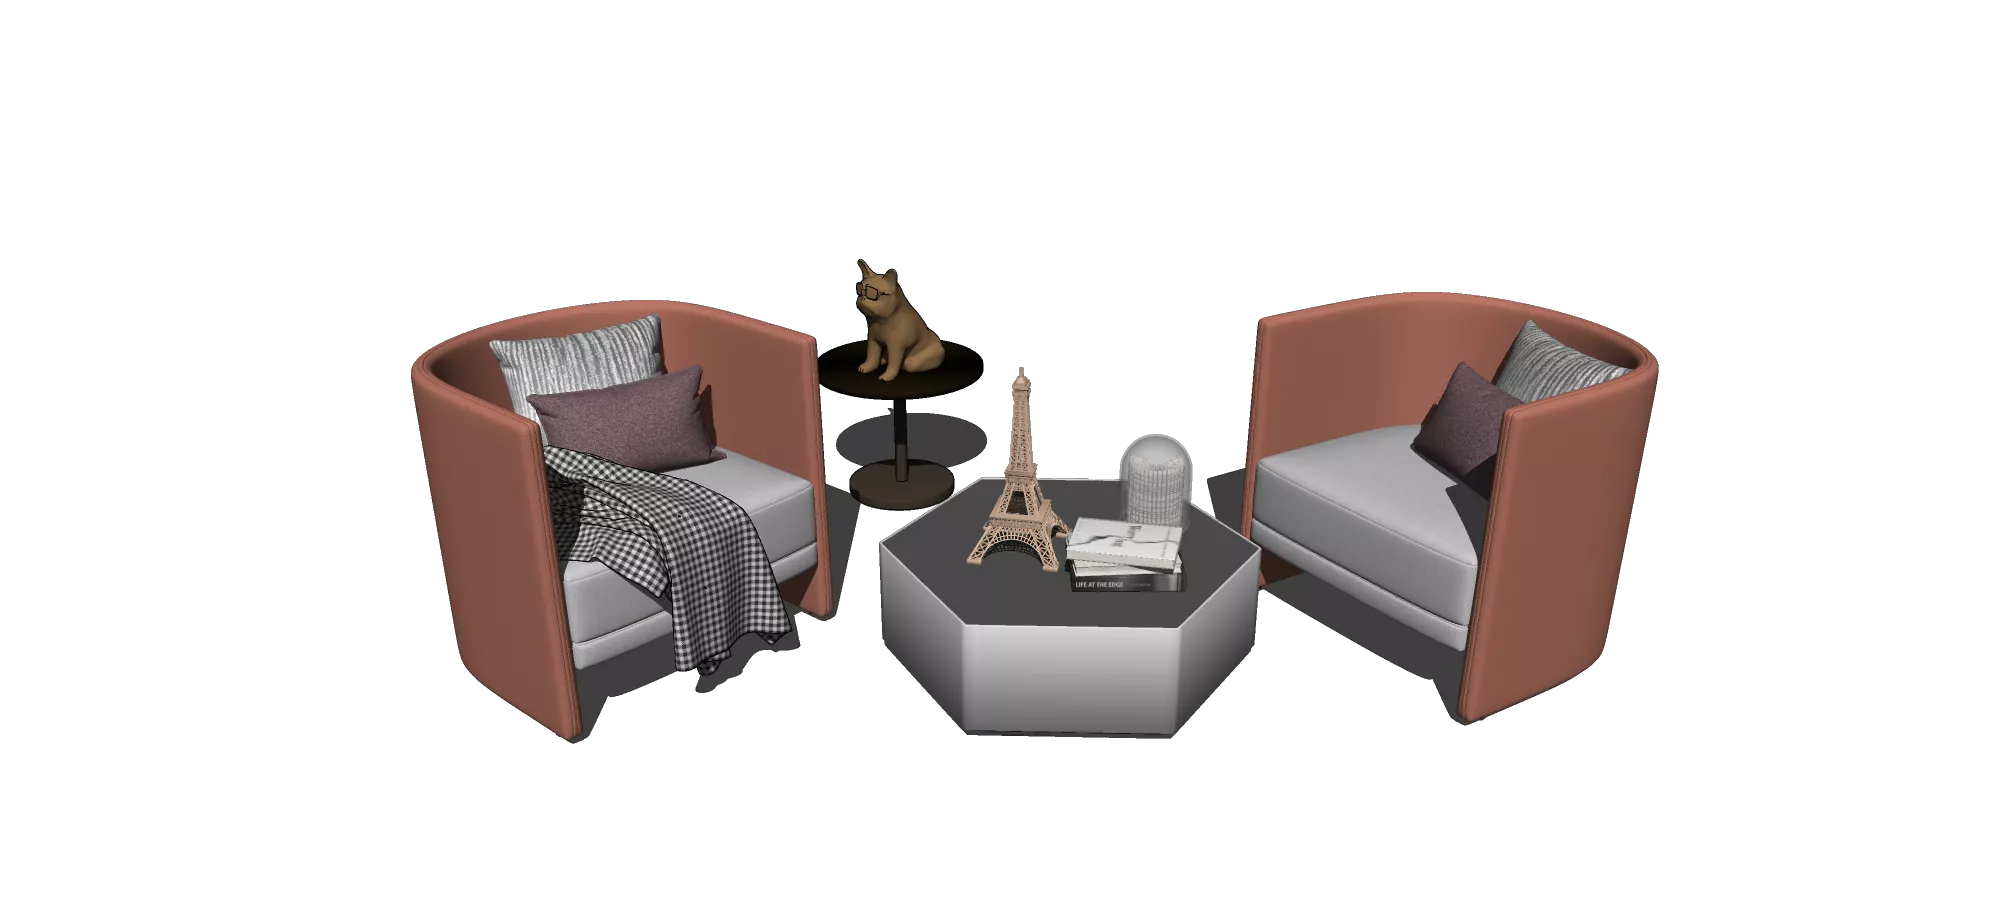 MODERN SOFA - SKETCHUP 3D MODEL - VRAY OR ENSCAPE - ID13126